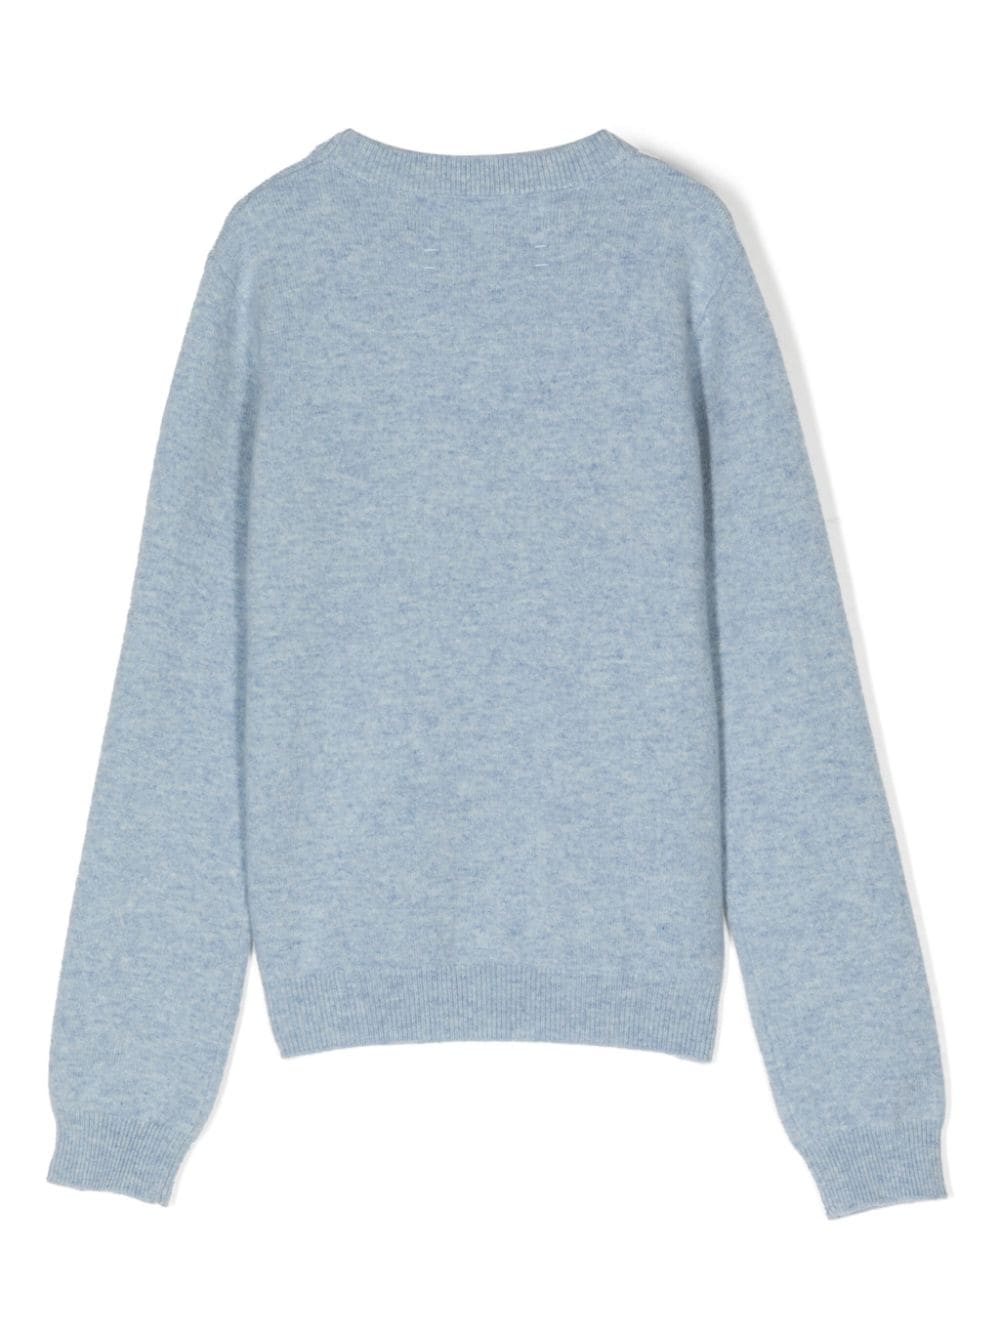 EXTREME CASHMERE N98 Kid Sweater – THE PEGAS